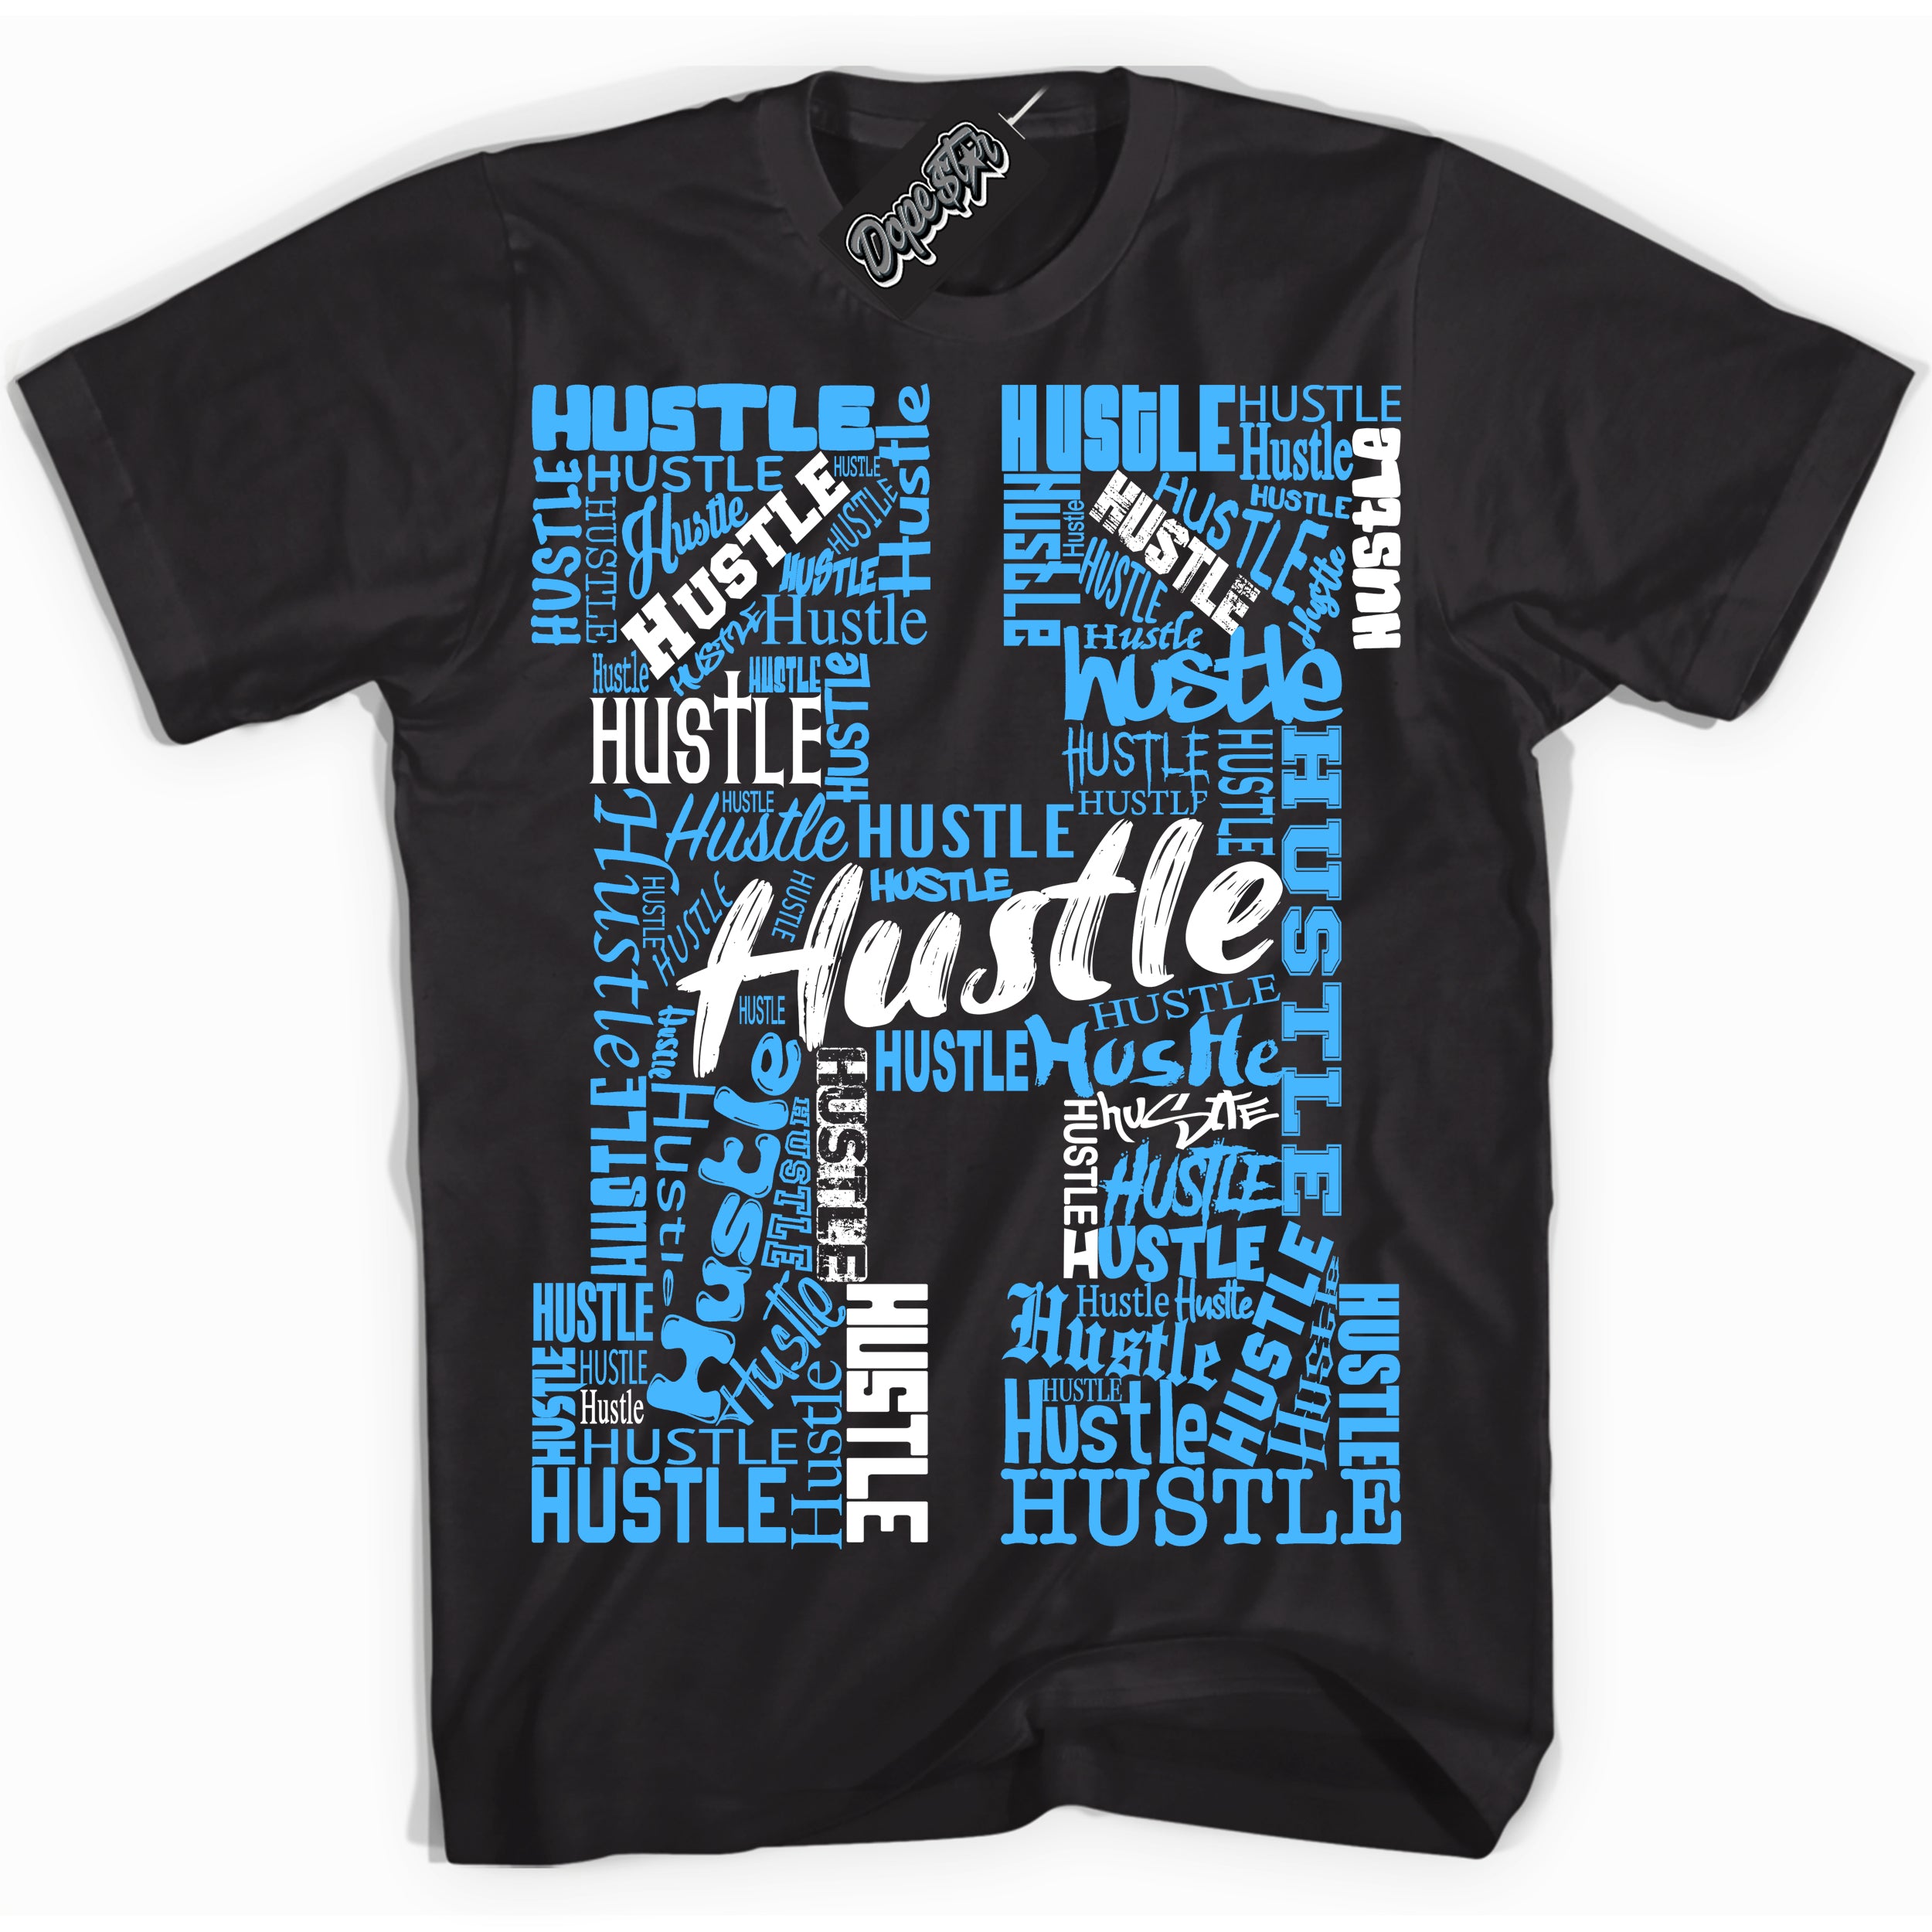 Cool Black graphic tee with “ Hustle ” design, that perfectly matches Powder Blue 9s sneakers 